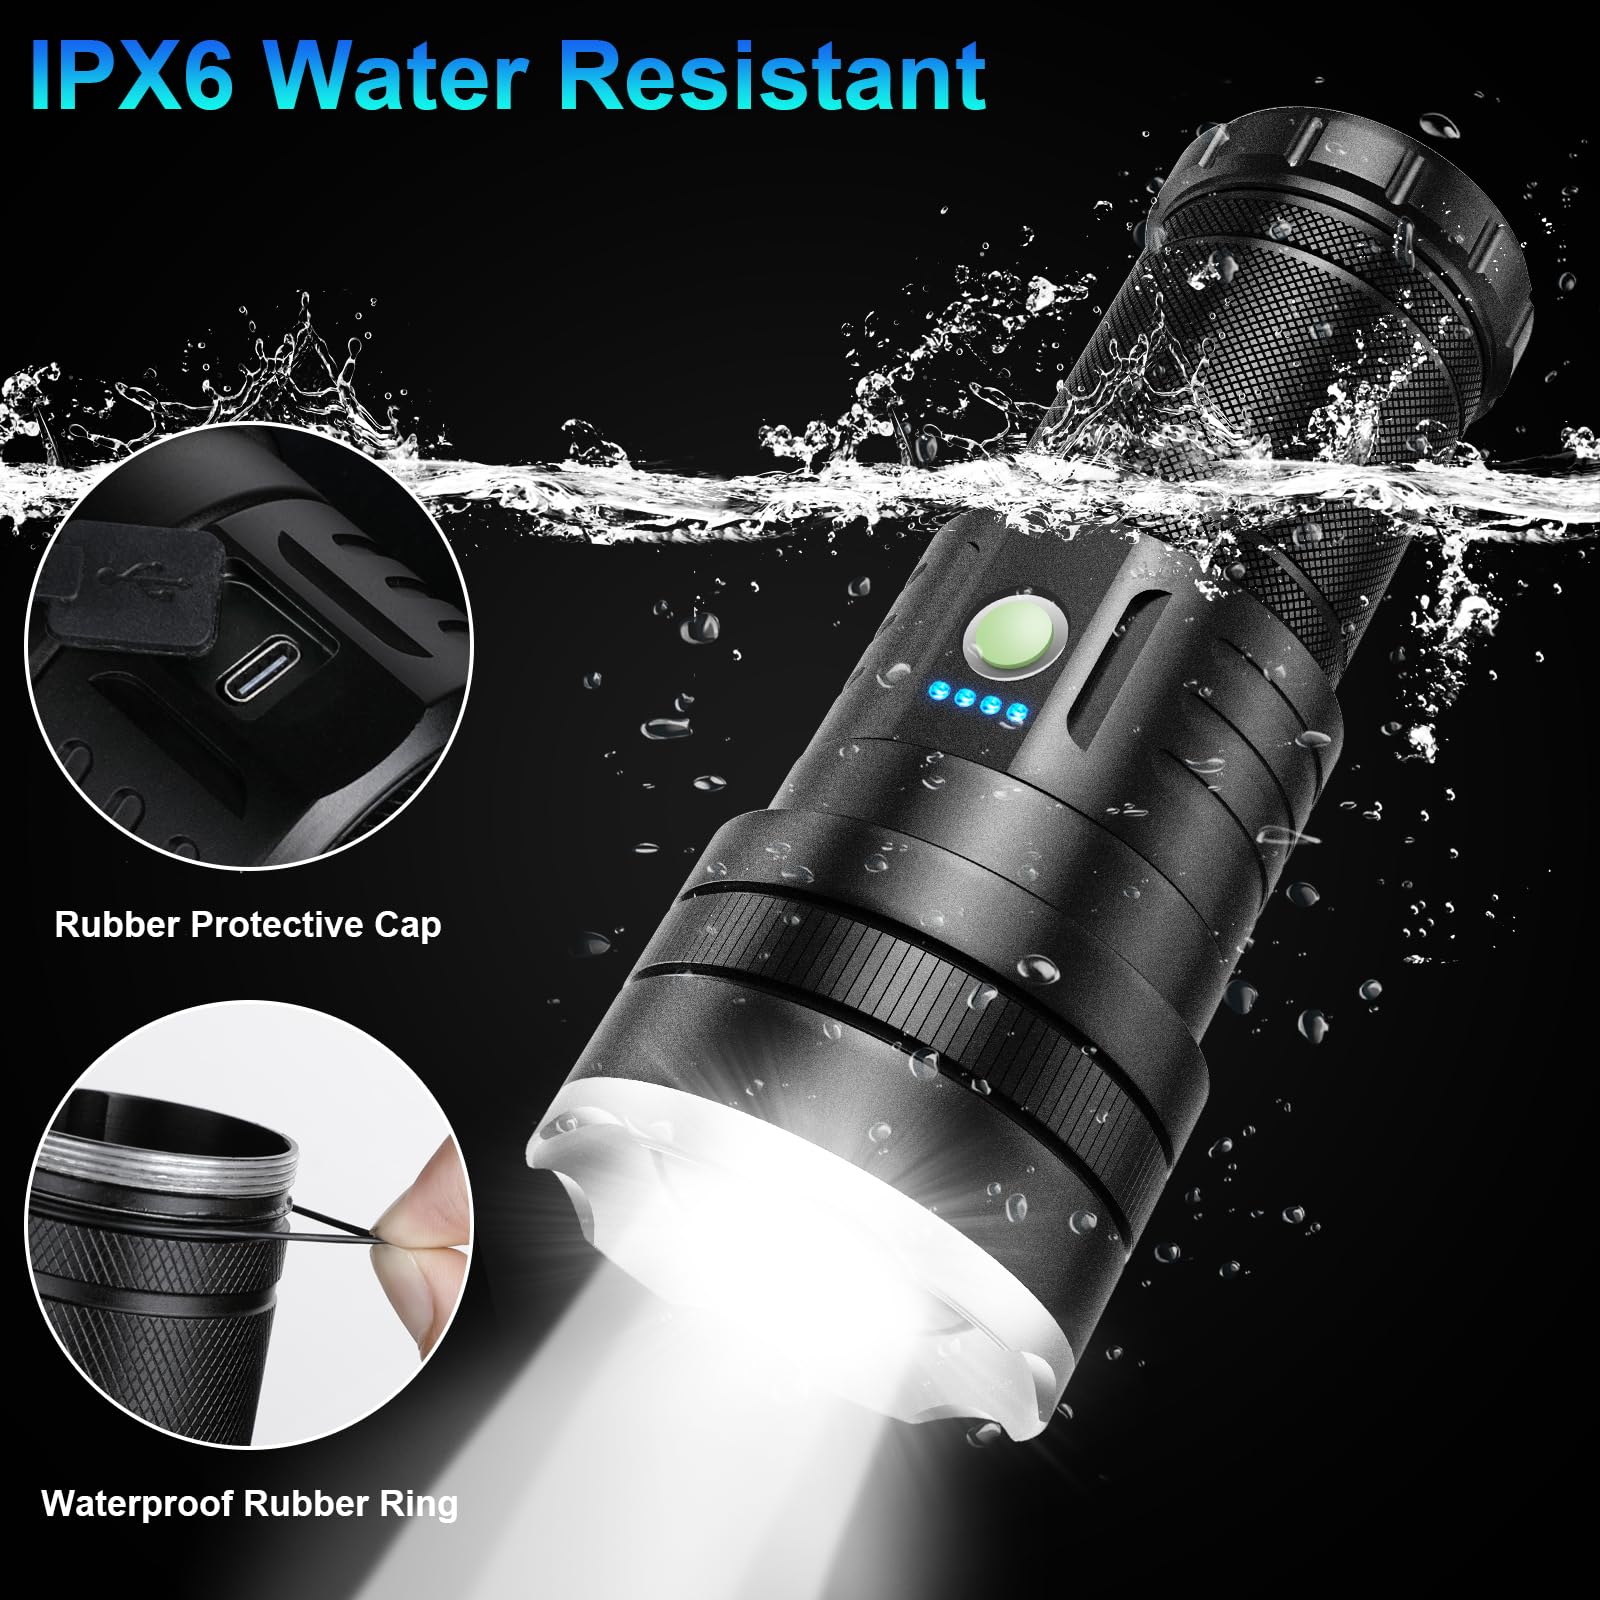 UOATEPC Rechargeable Flash Light LED Flashlights High Lumens, 250000 Lumens Super Bright Tactical Handheld Flashlight, 3Modes and Waterproof, Powerful Flashlight for Home Emergencies Camping